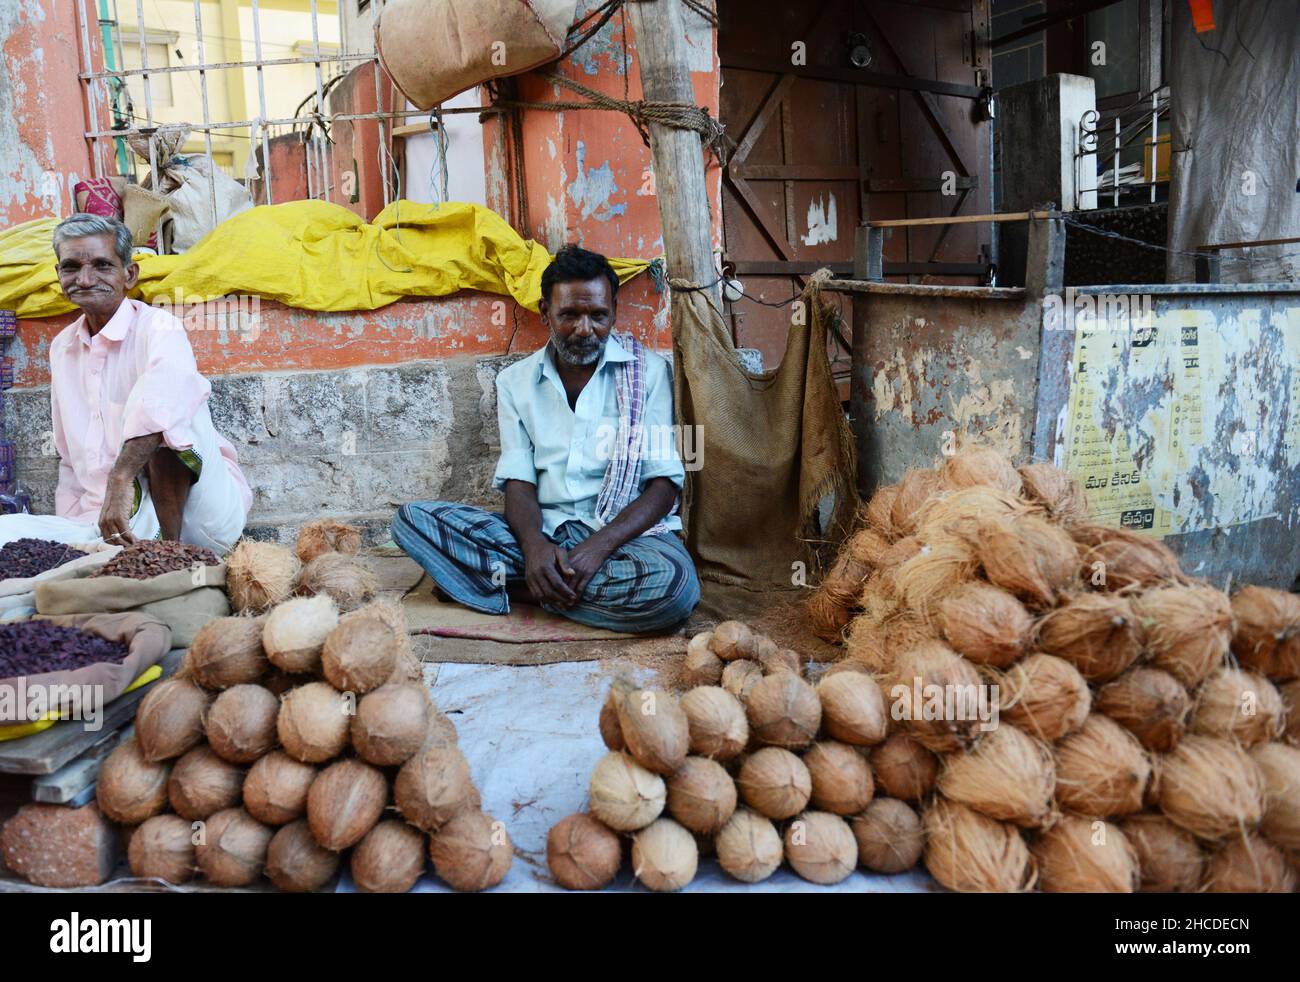 A coconut vendor selling his dried coconuts on the main street of Kuppam, Andhra Pradesh, India. Stock Photo